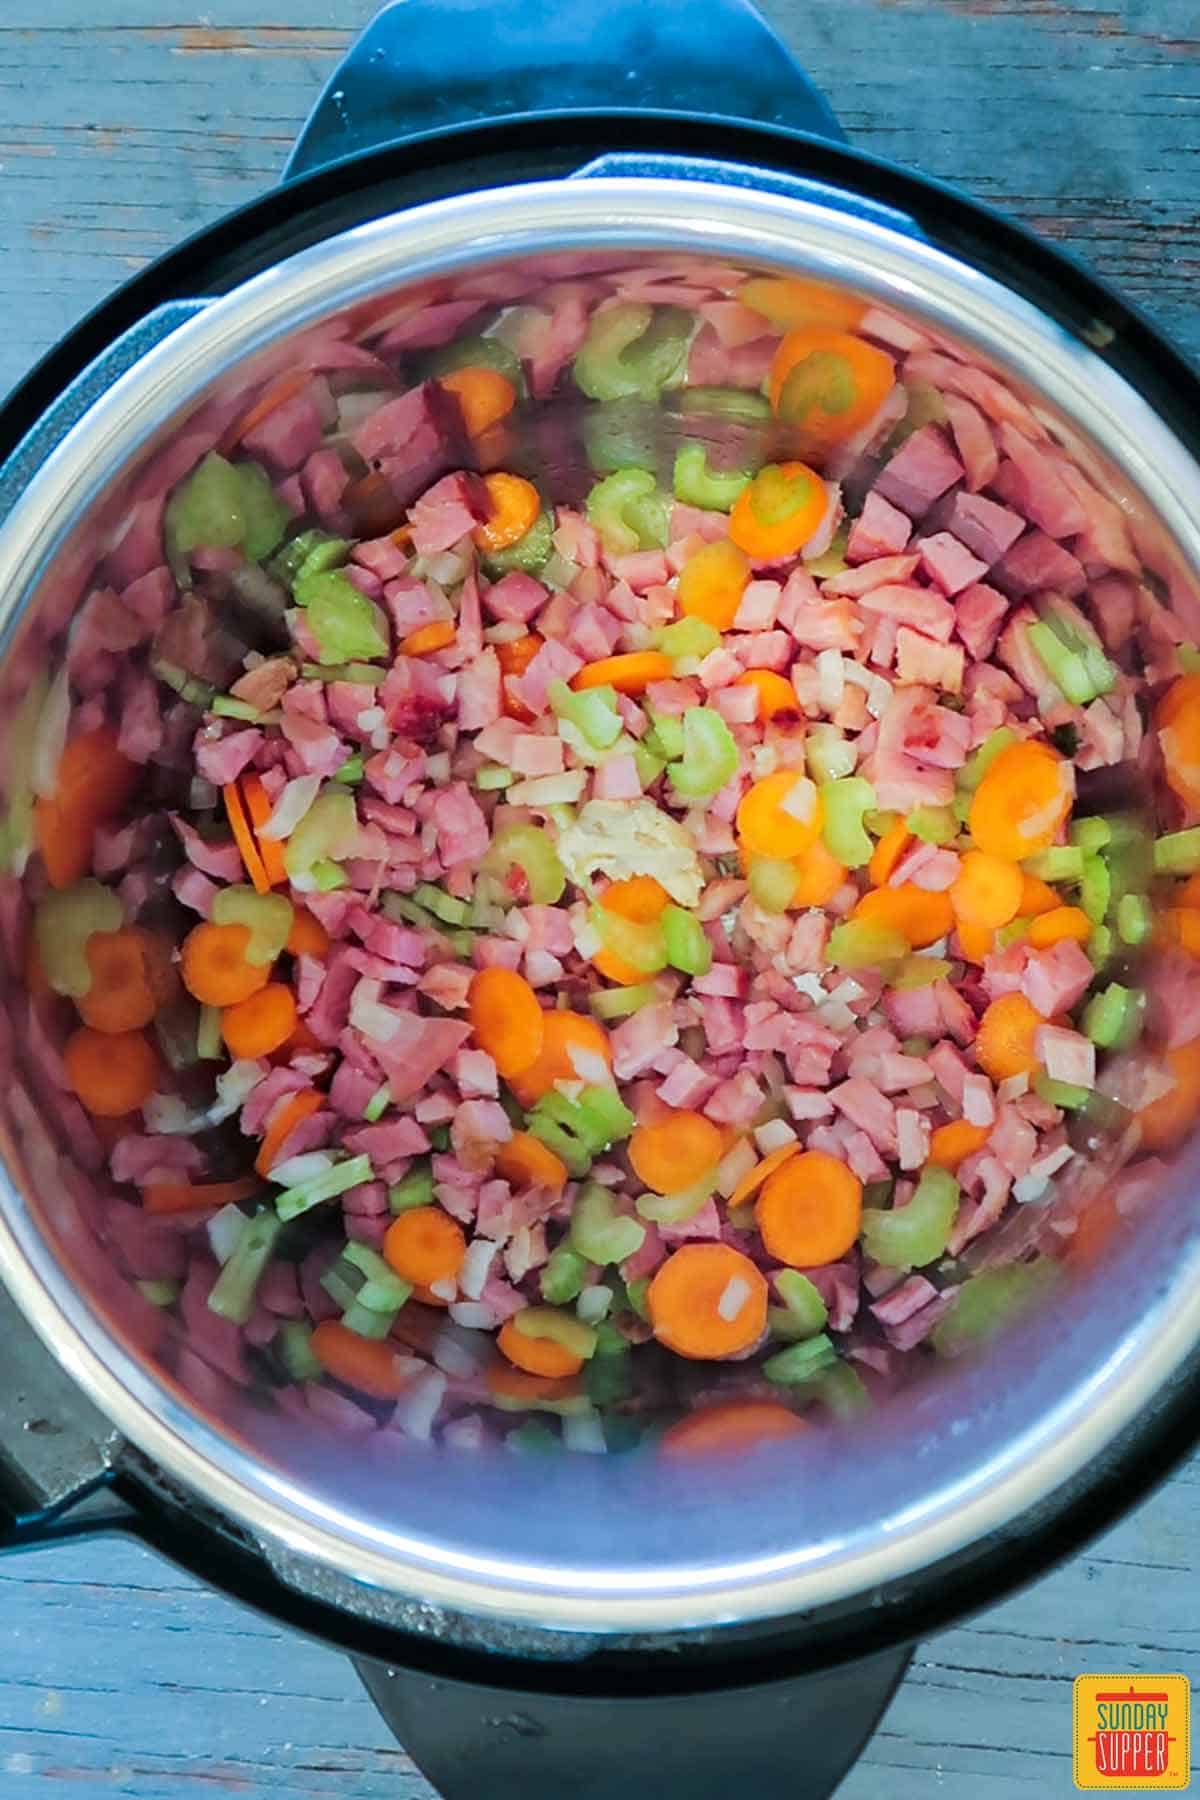 Cooking ham with celery and carrots for ham soup recipe